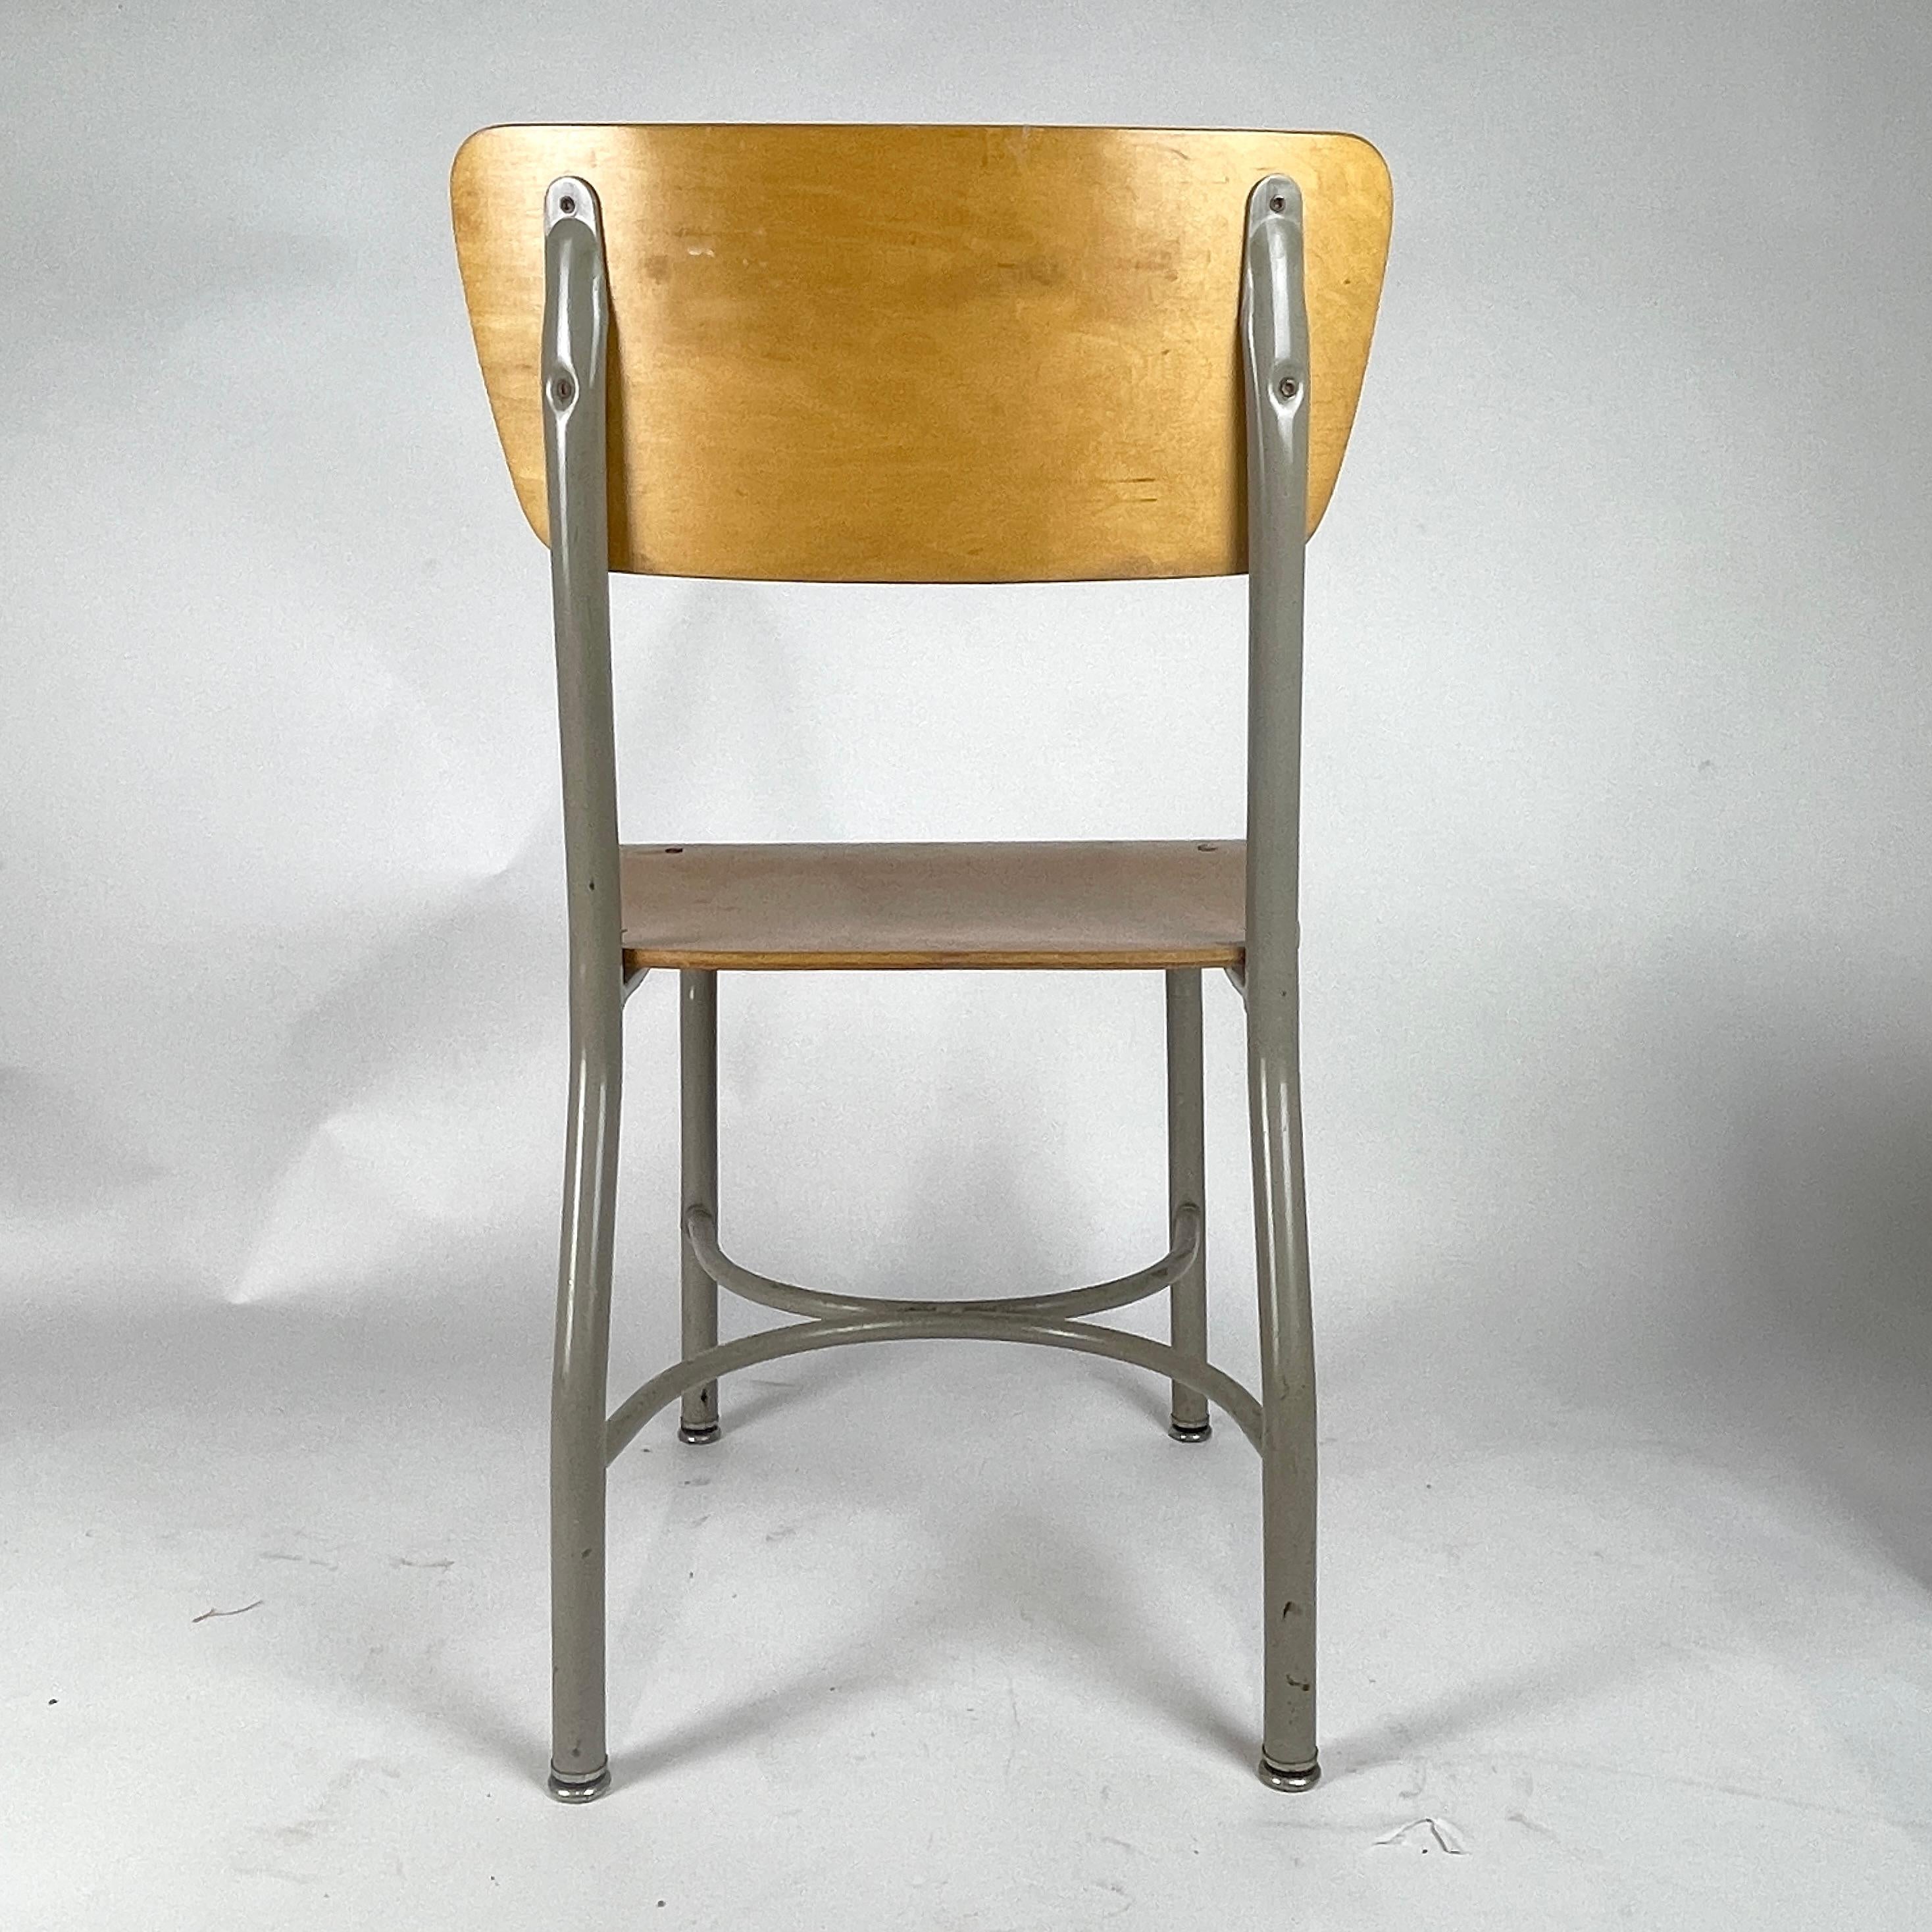 Midcentury French Style Grey & Birch Plywood School or Cafe Chairs -35 Available For Sale 2